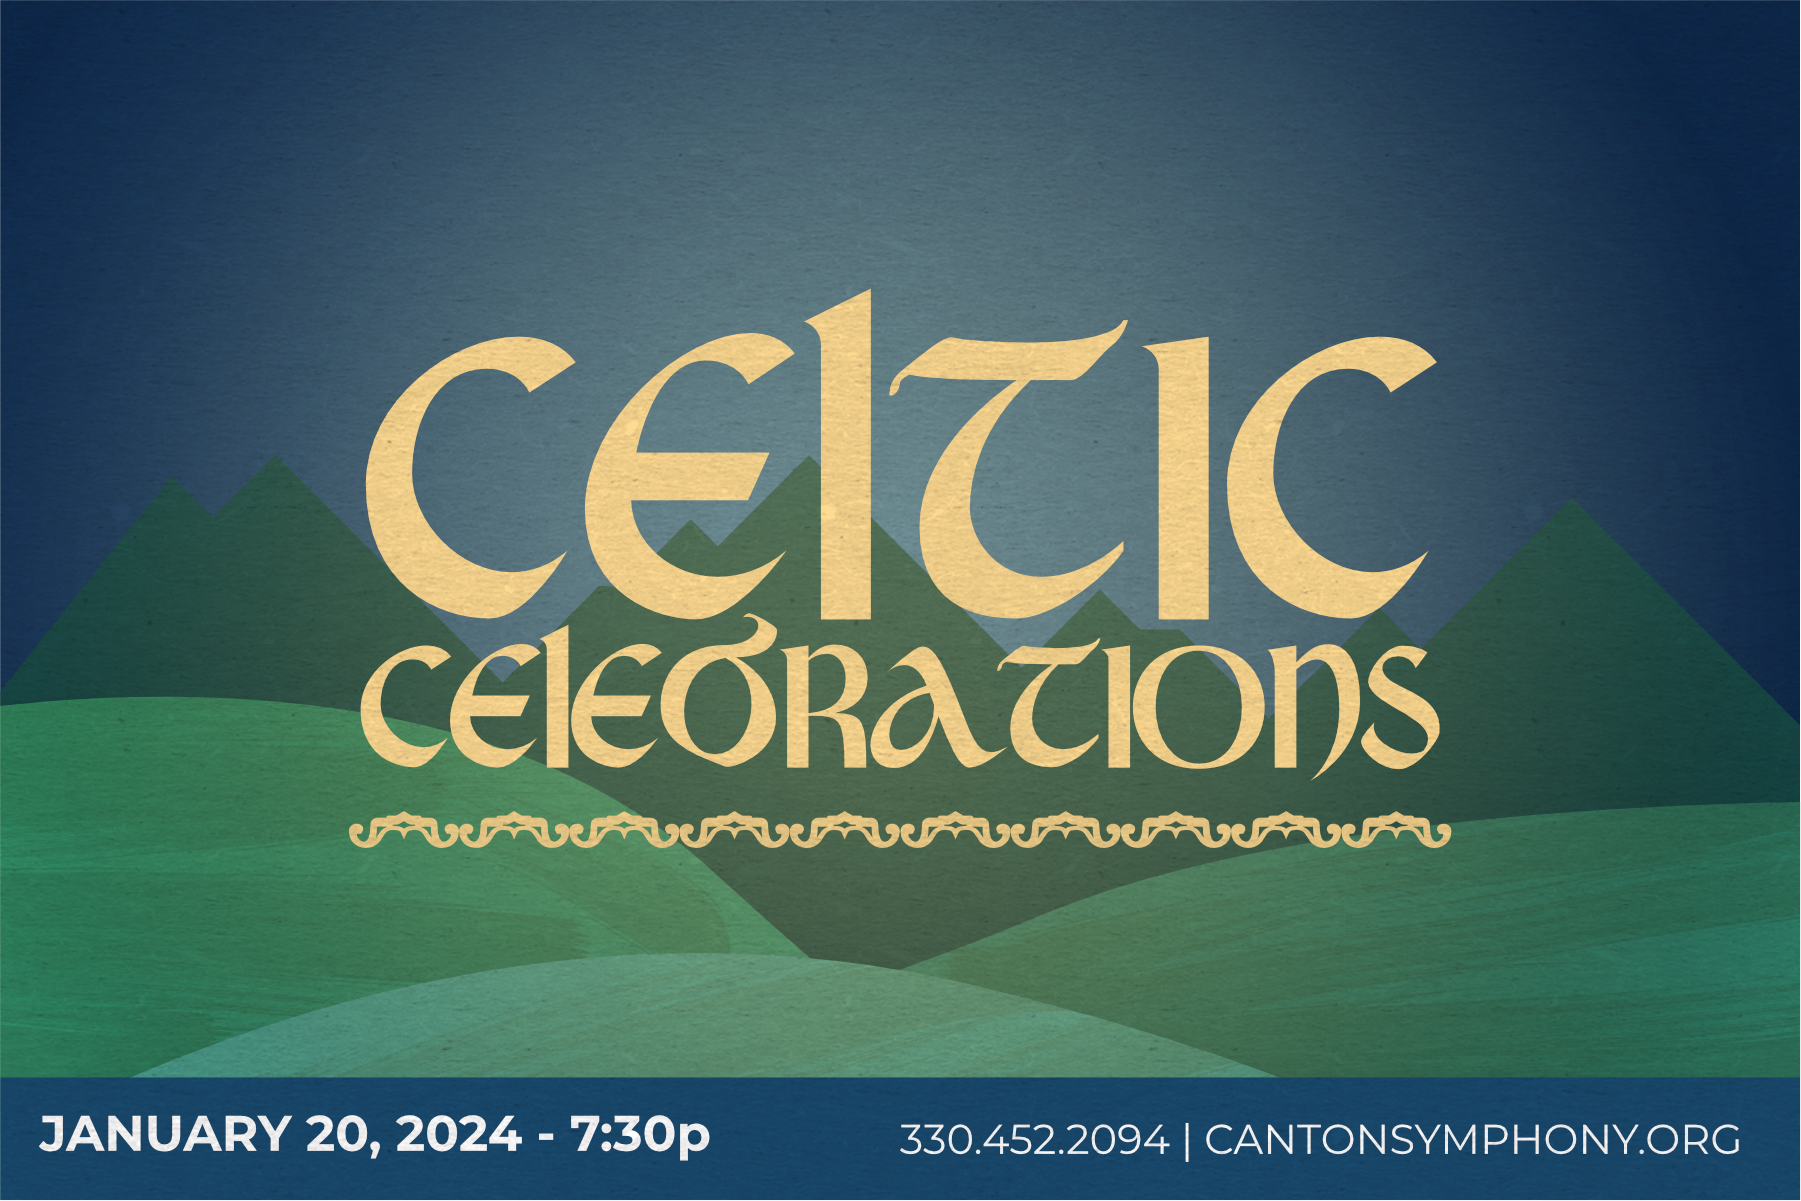 A graphic depicting the rolling hills and grasslands of Scotland. "Celtic Celebrations" is displayed front and center in a Gaelic-inspired script.